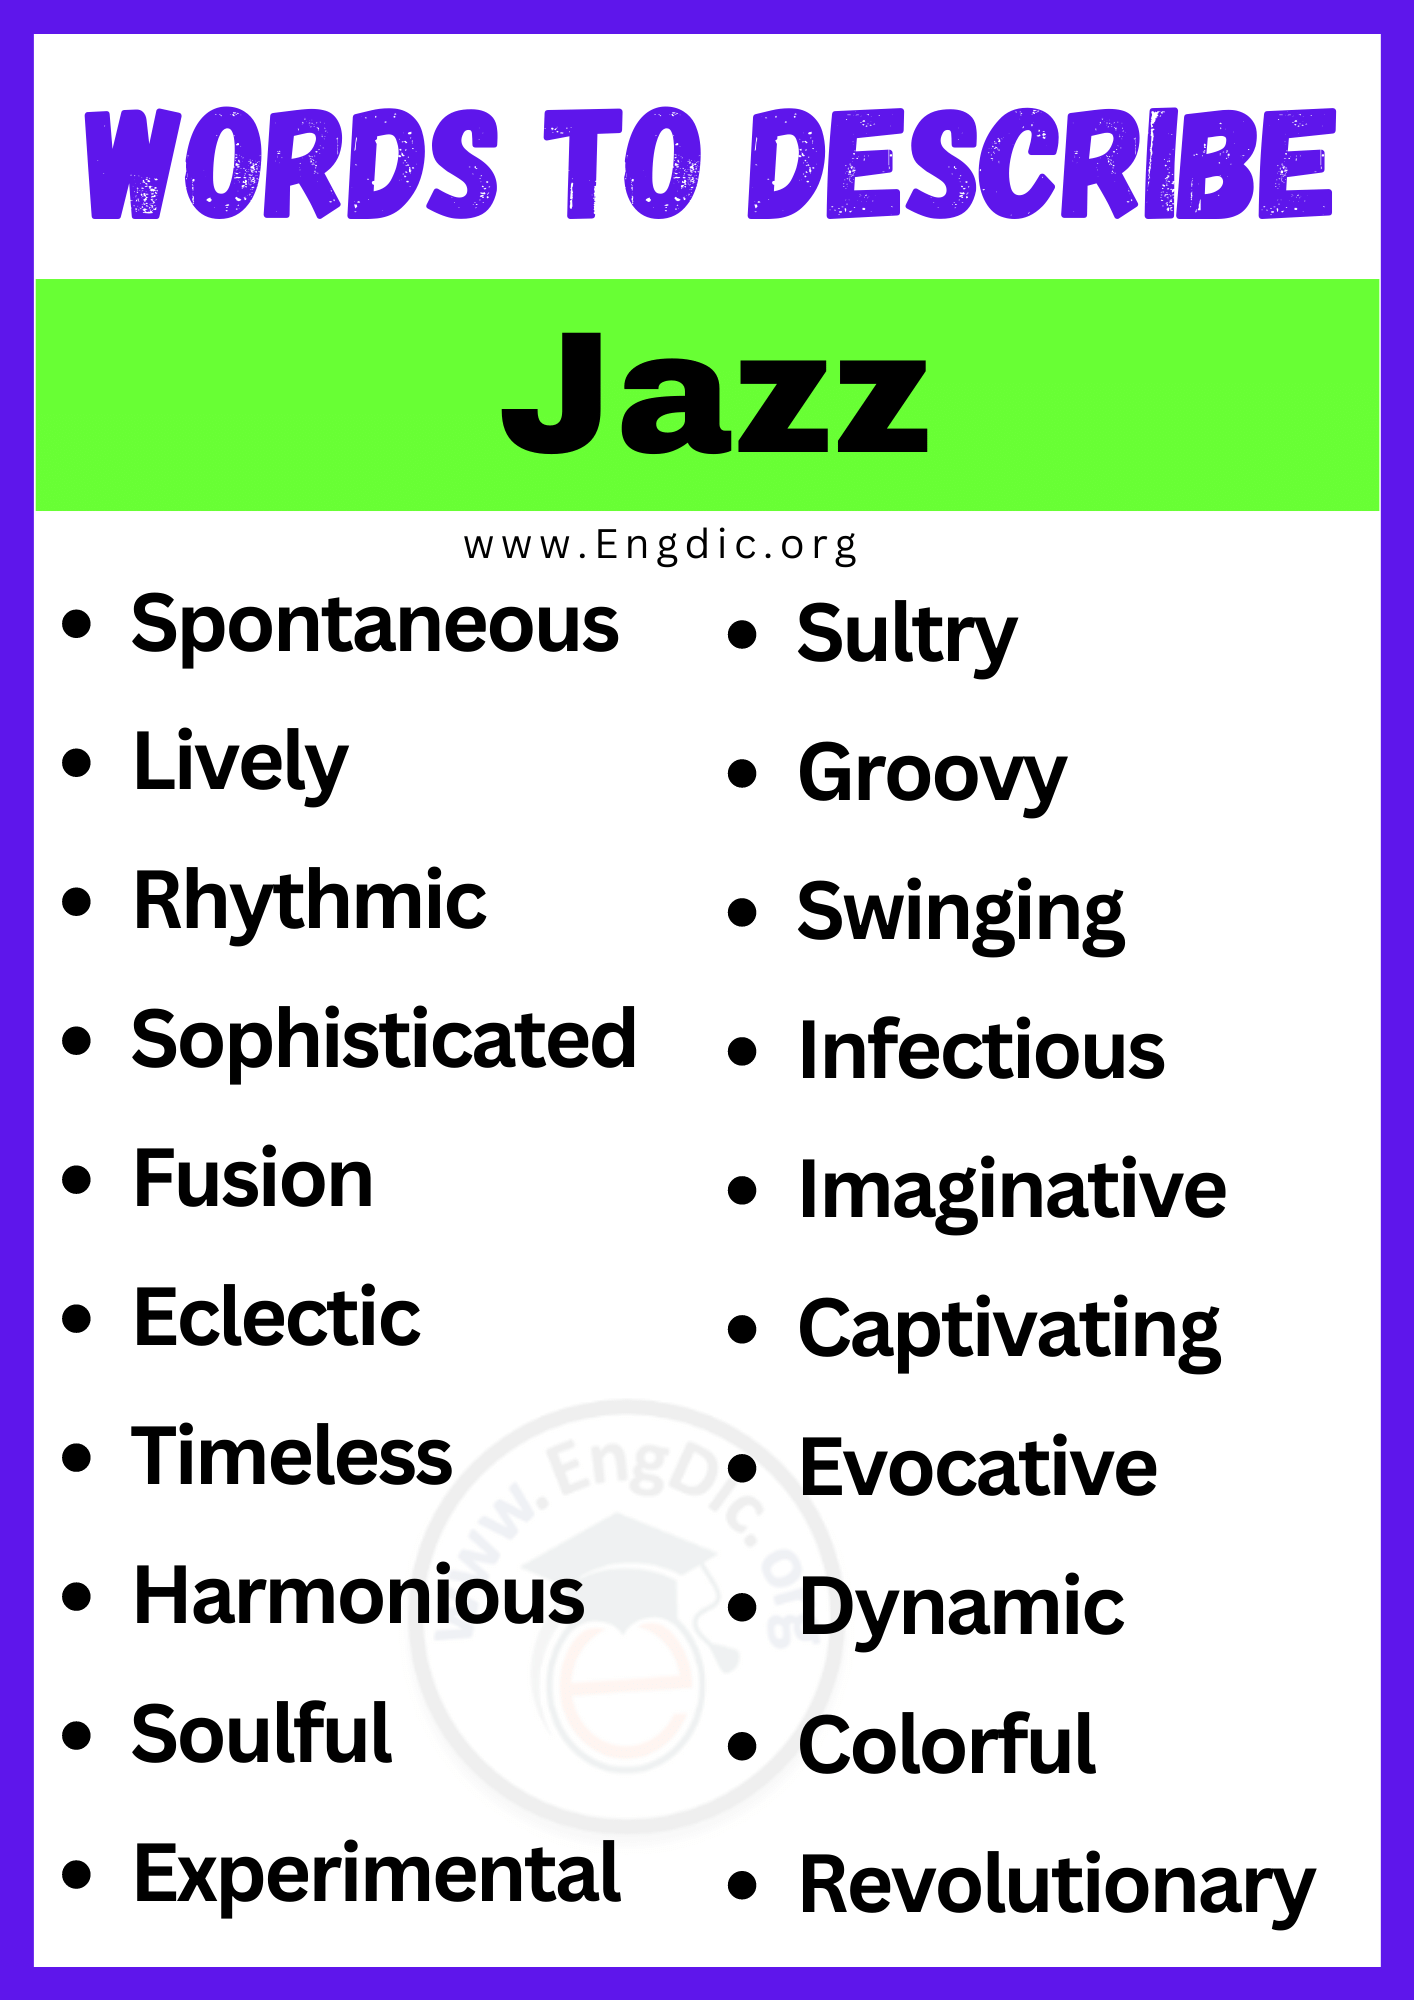 Words to Describe Jazz